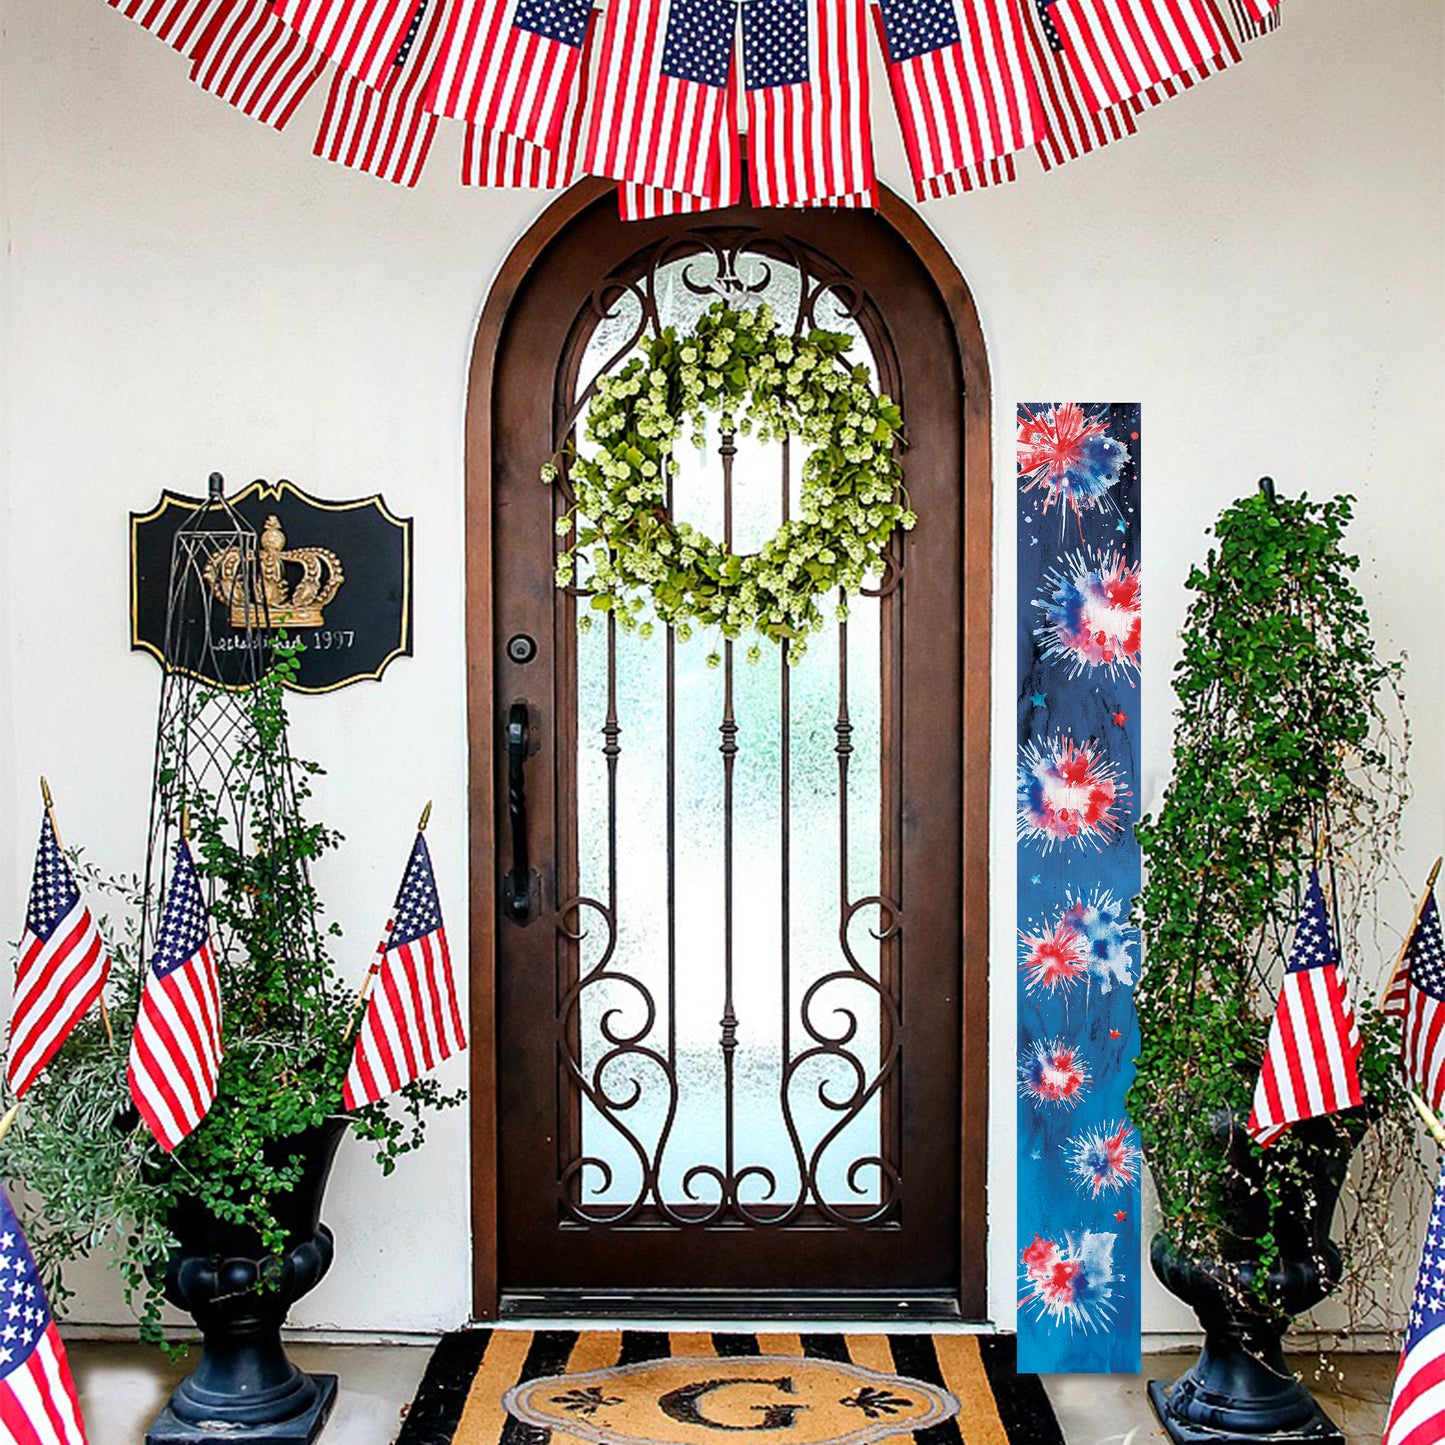 72in Firework Pattern Porch Sign - Patriotic Wooden Porch Decor | 4th of July Decor for Front Door | Independence Day Outdoor Decor